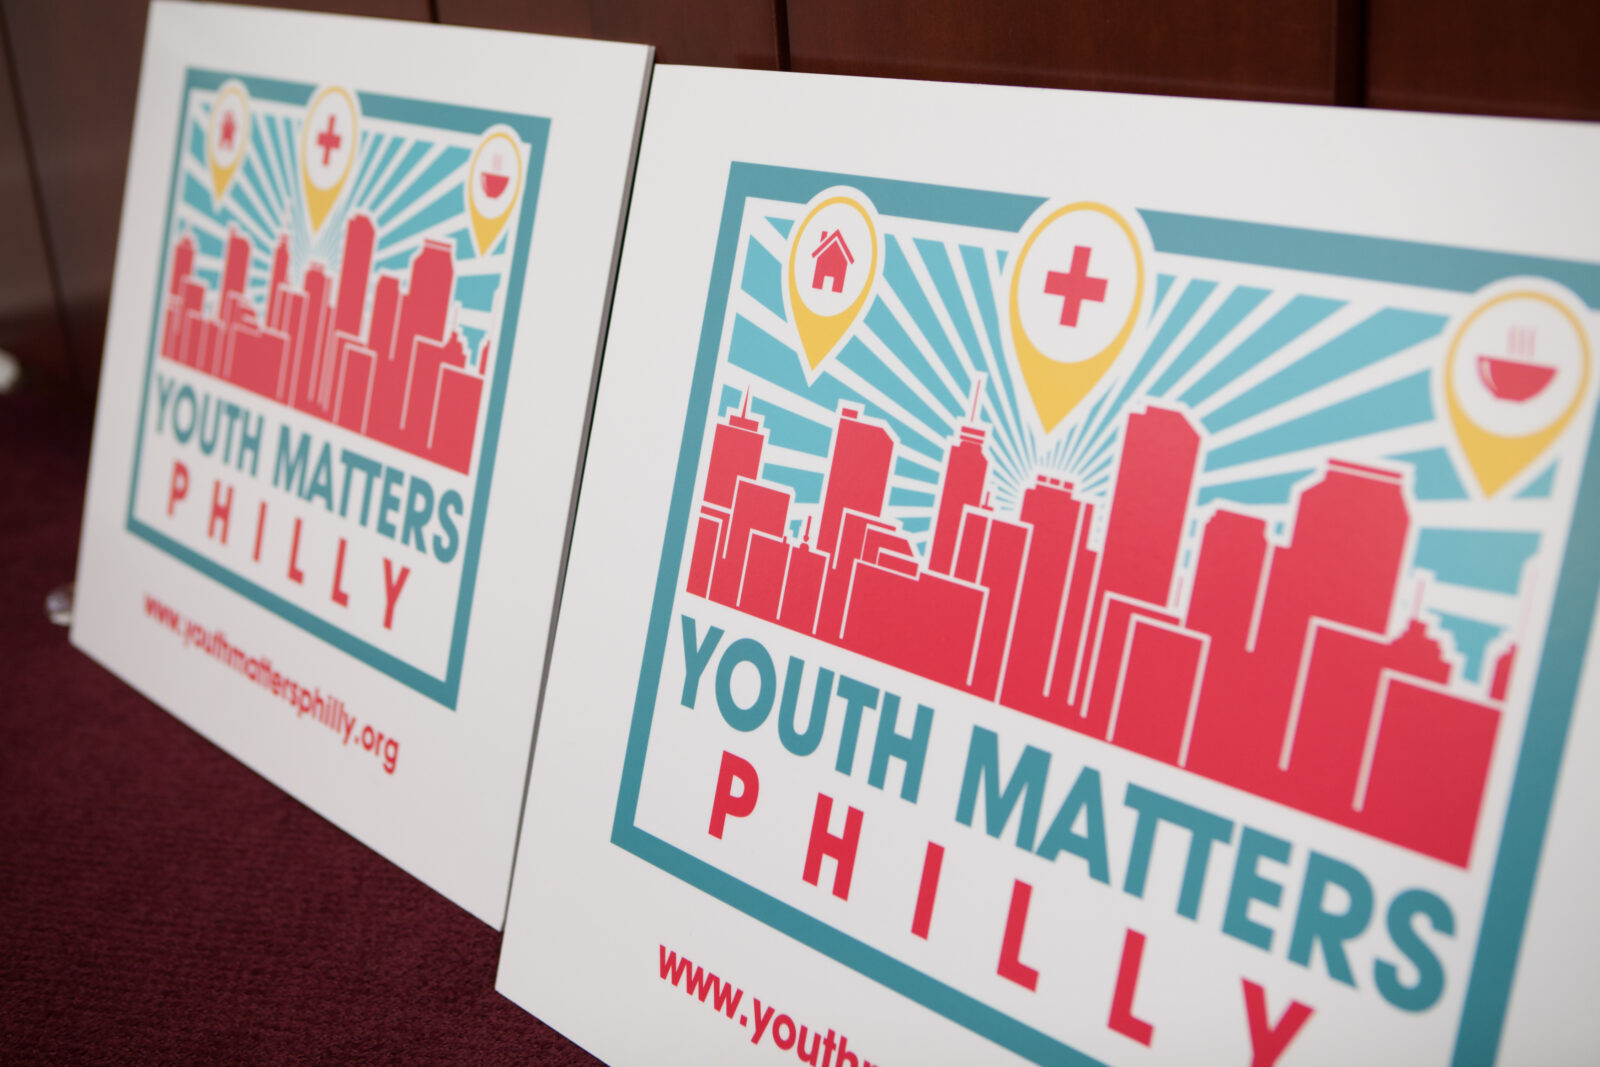 Youth Matters: Philly